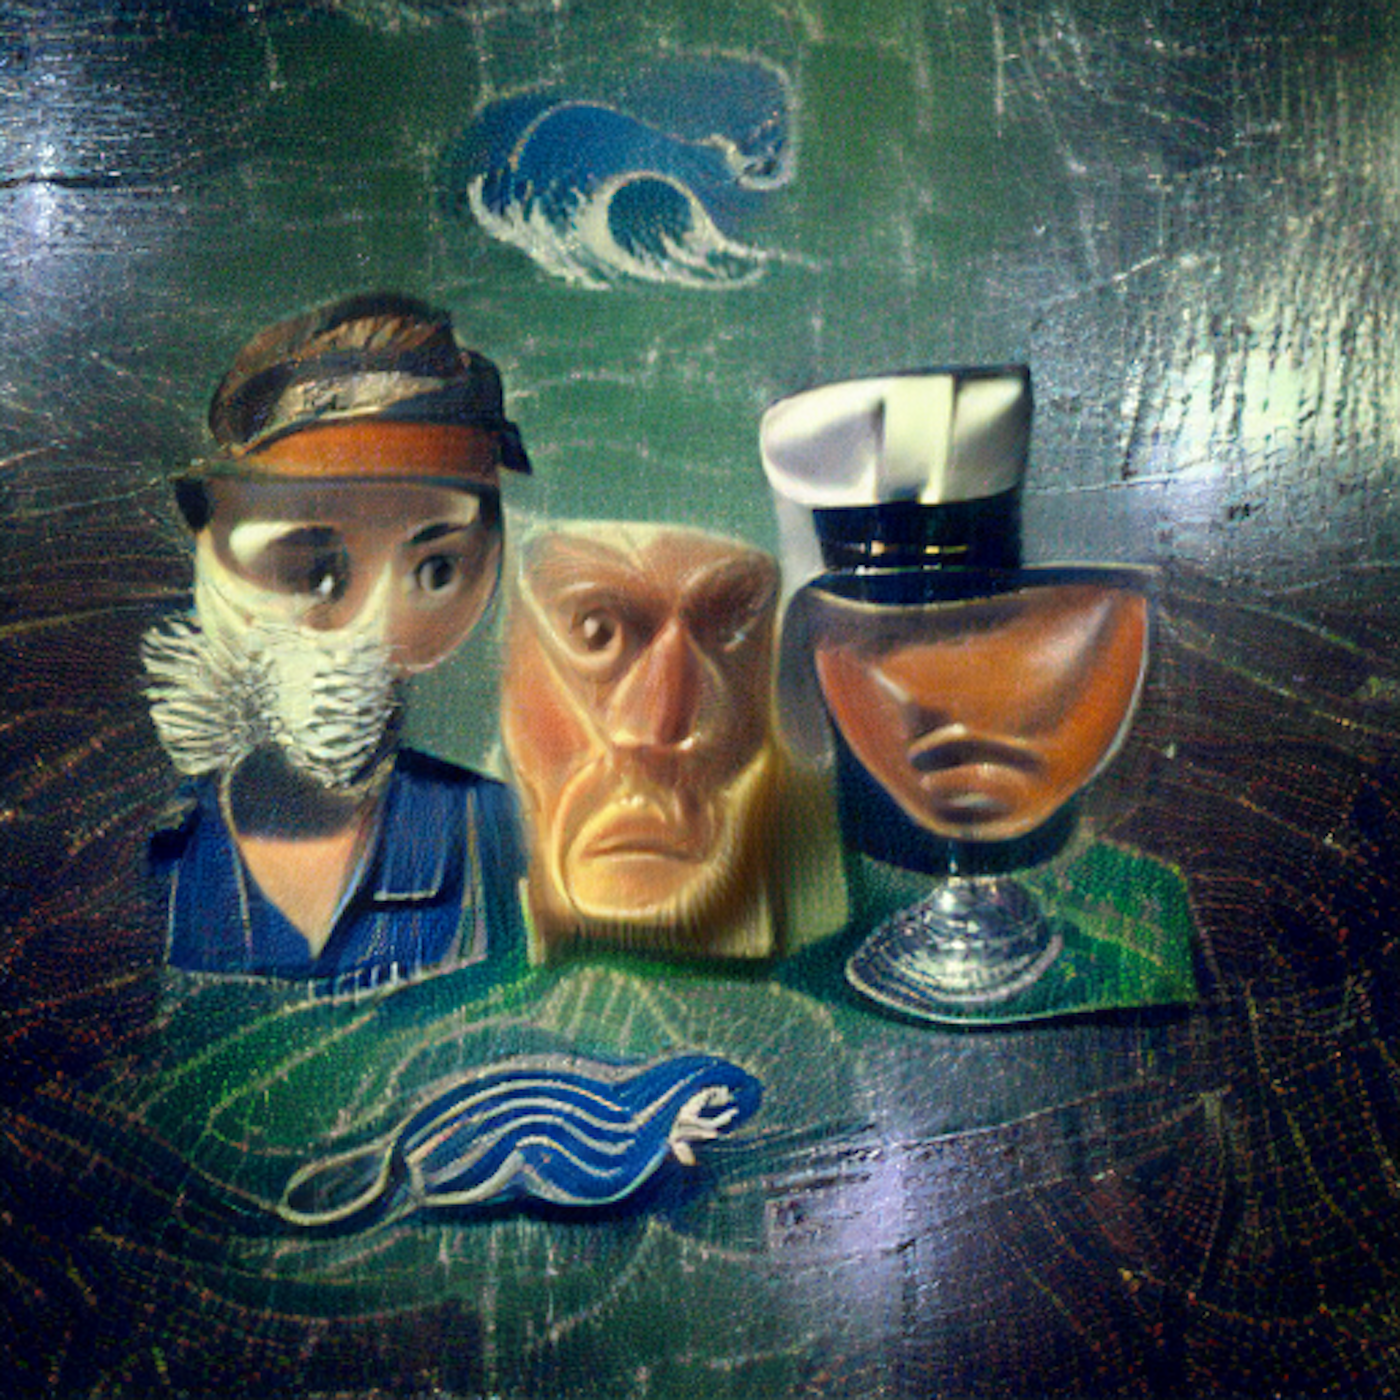 The Zookeeper, the Bartender, and the Seafarer [Waves]